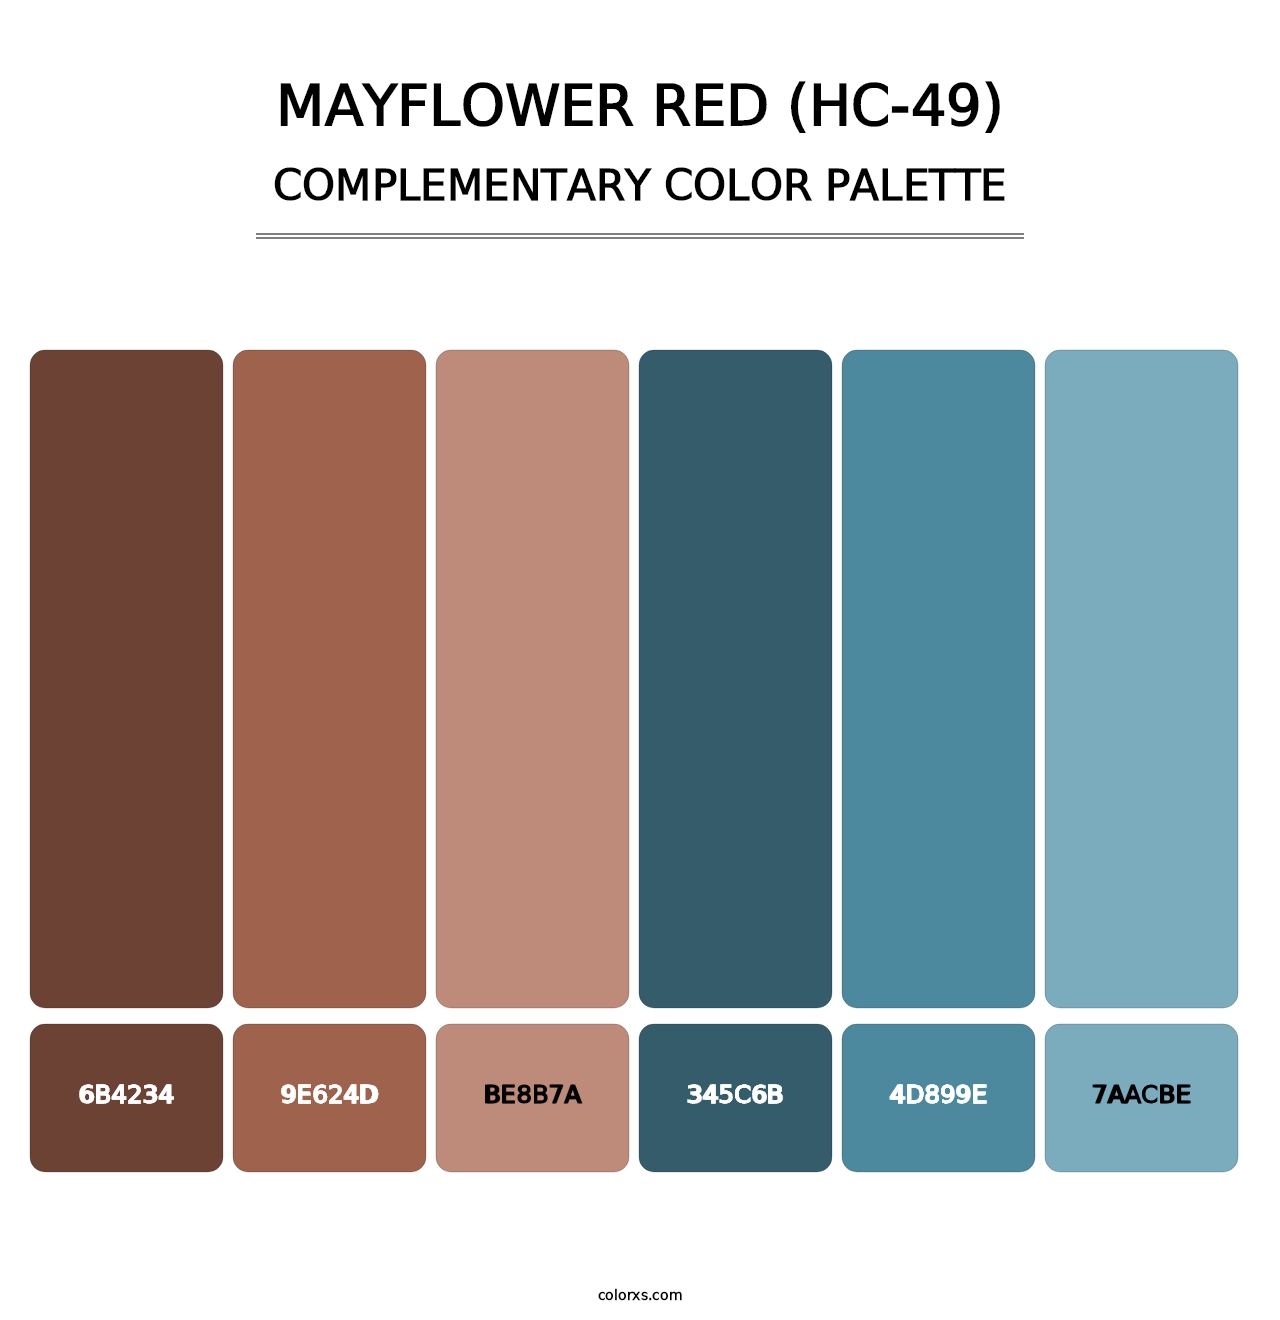 Mayflower Red (HC-49) - Complementary Color Palette